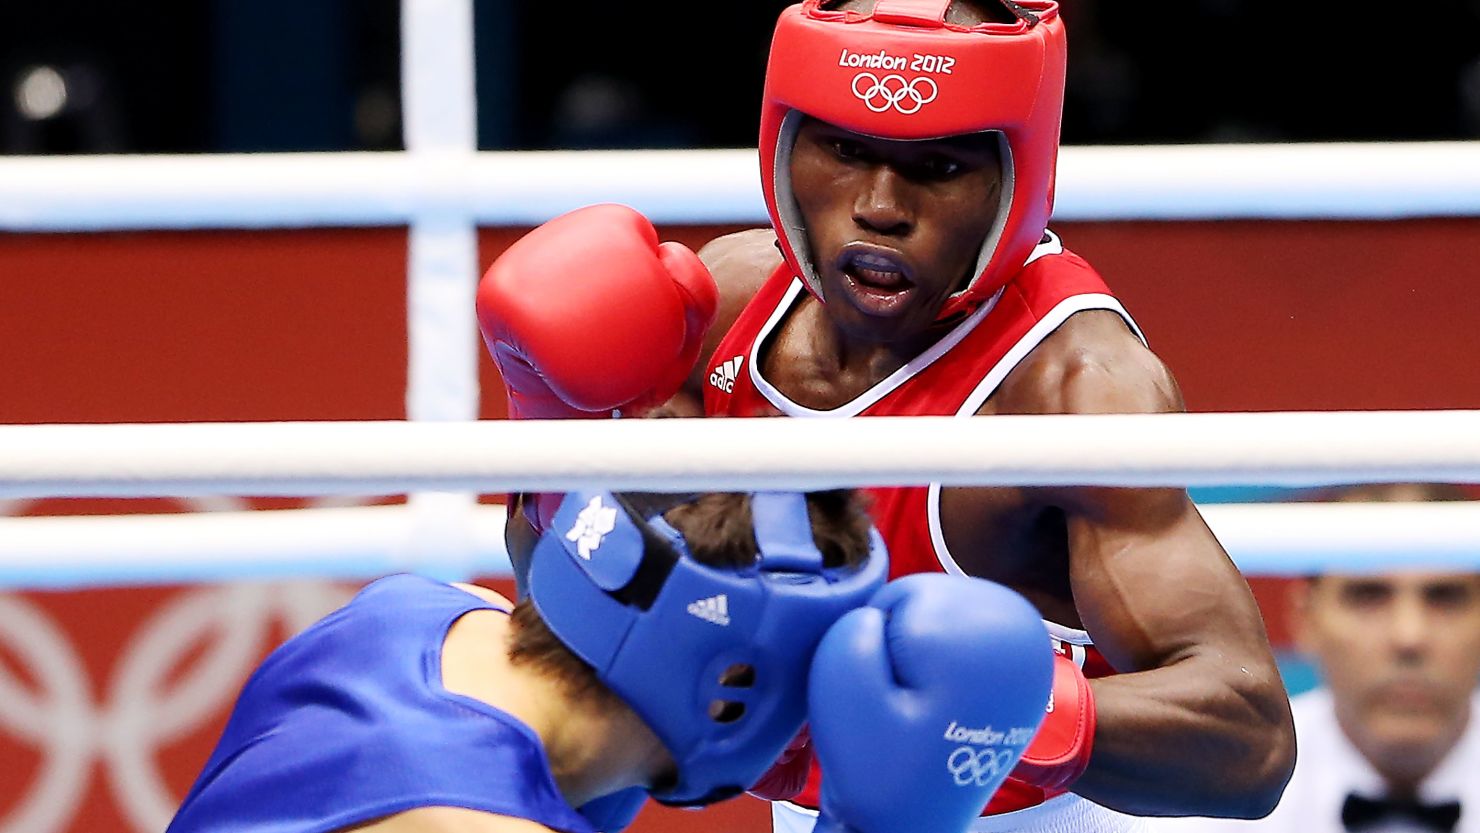 Cameroon boxer Serge Ambomo is one of seven athletes who have gone missing from the Olympics